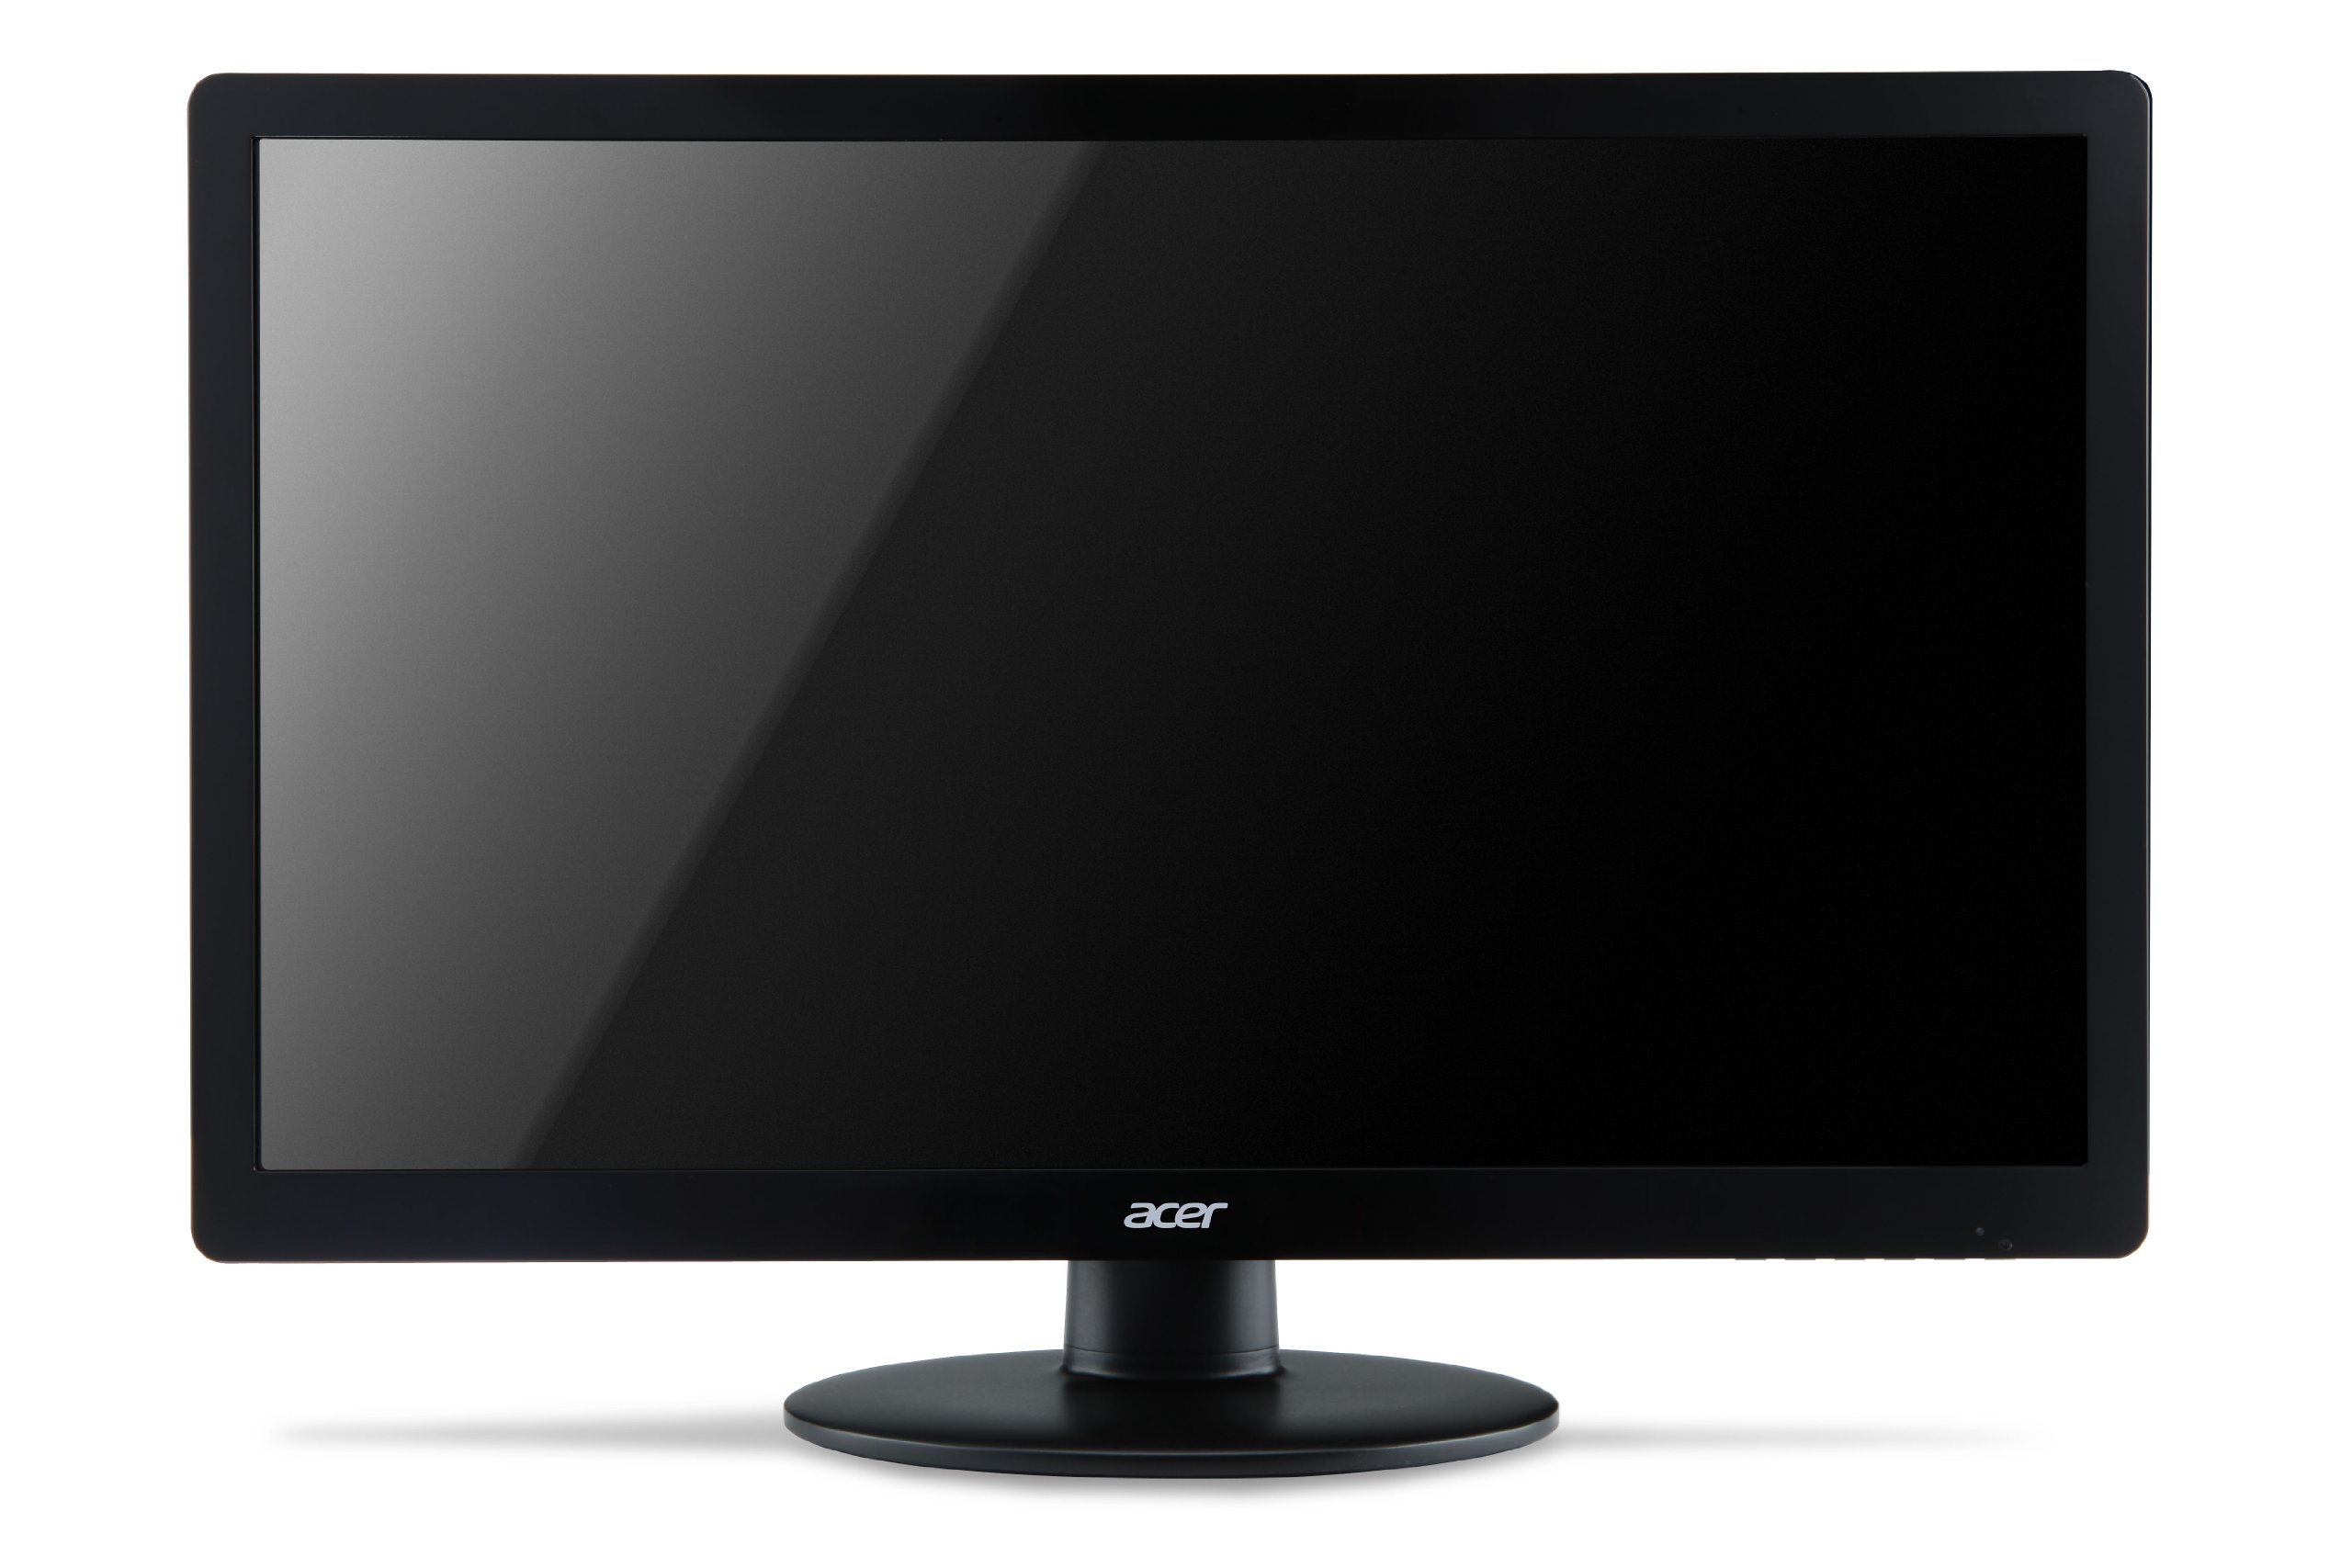 Book Cover Acer S220HQL Abd 21.5-Inch Widescreen LCD Monitor,Black Full HD (1920 x 1080) 21.5 in